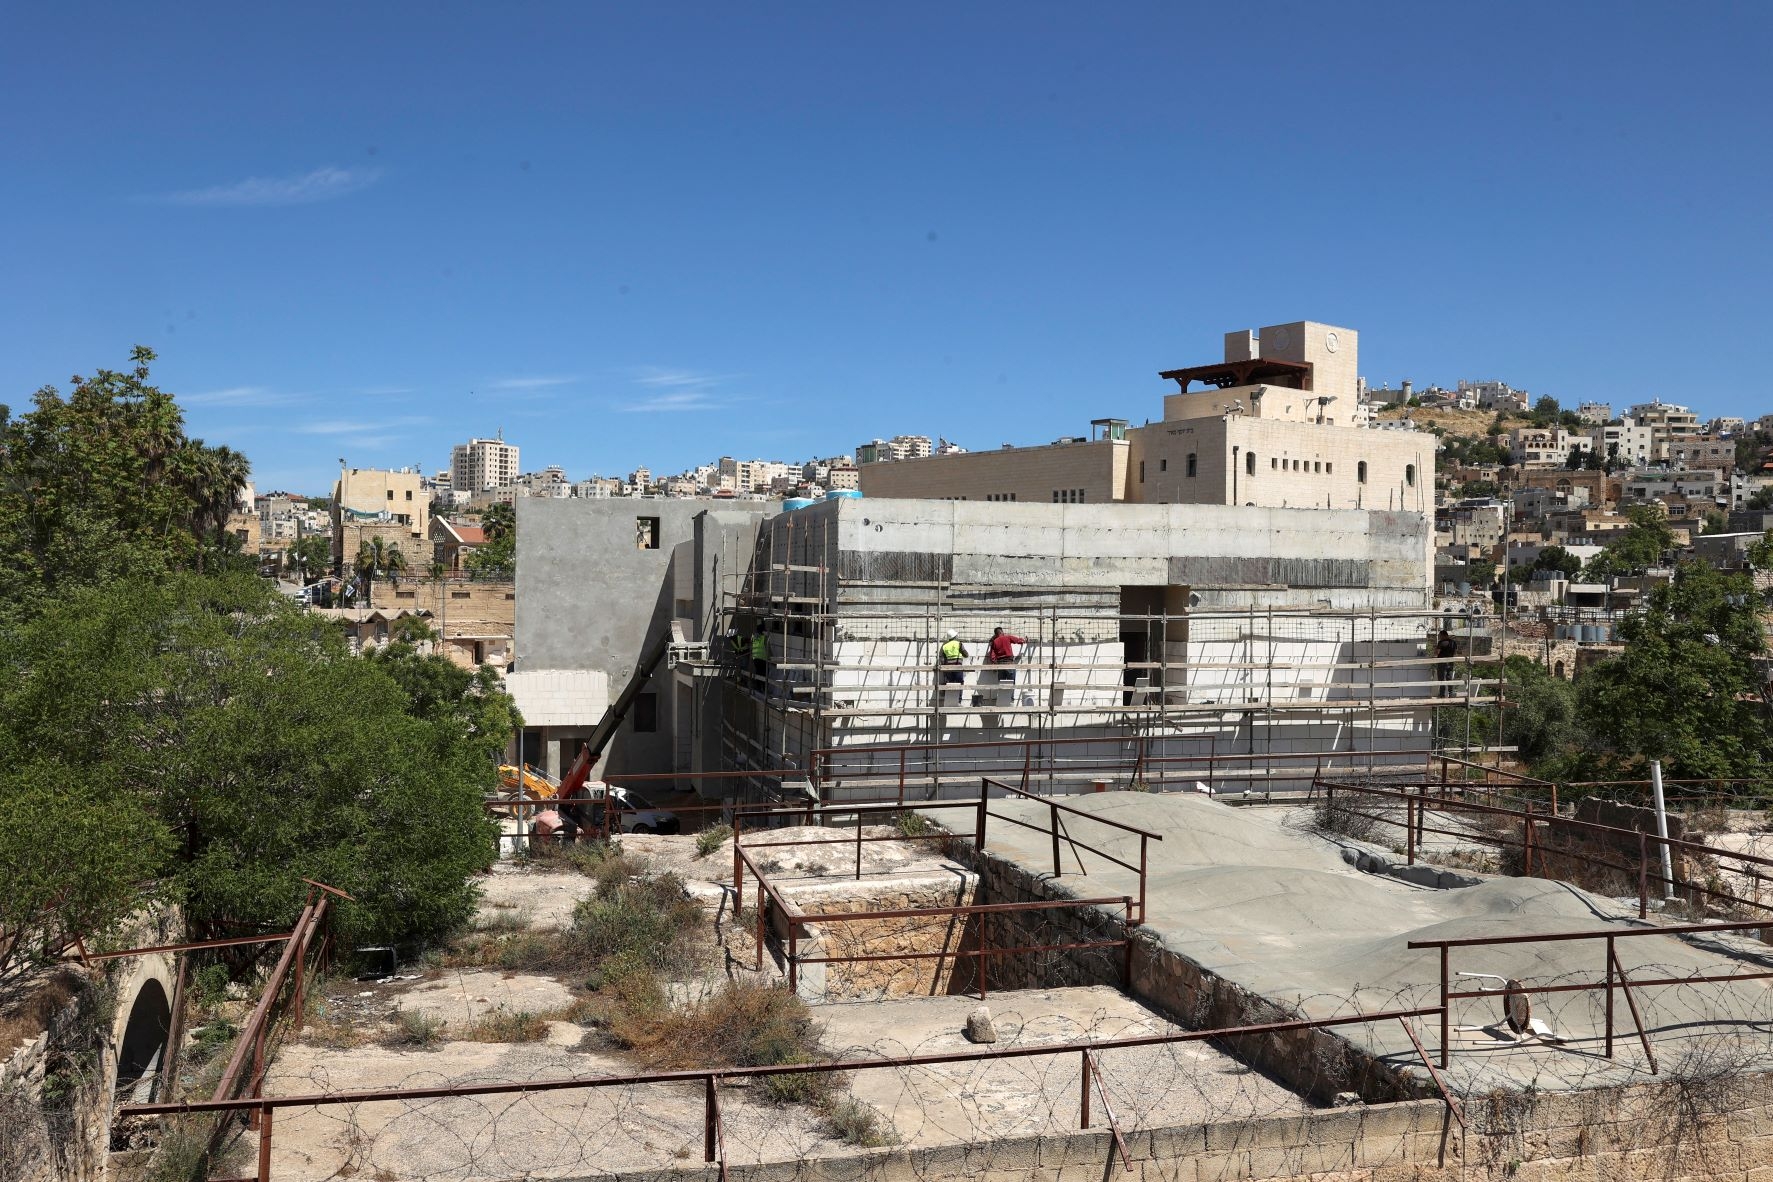 Builders work on new constructions in a settlement zone on a site where the old central bus station for the Hebron Governorate formerly stood on 8 May 2022 (AFP)